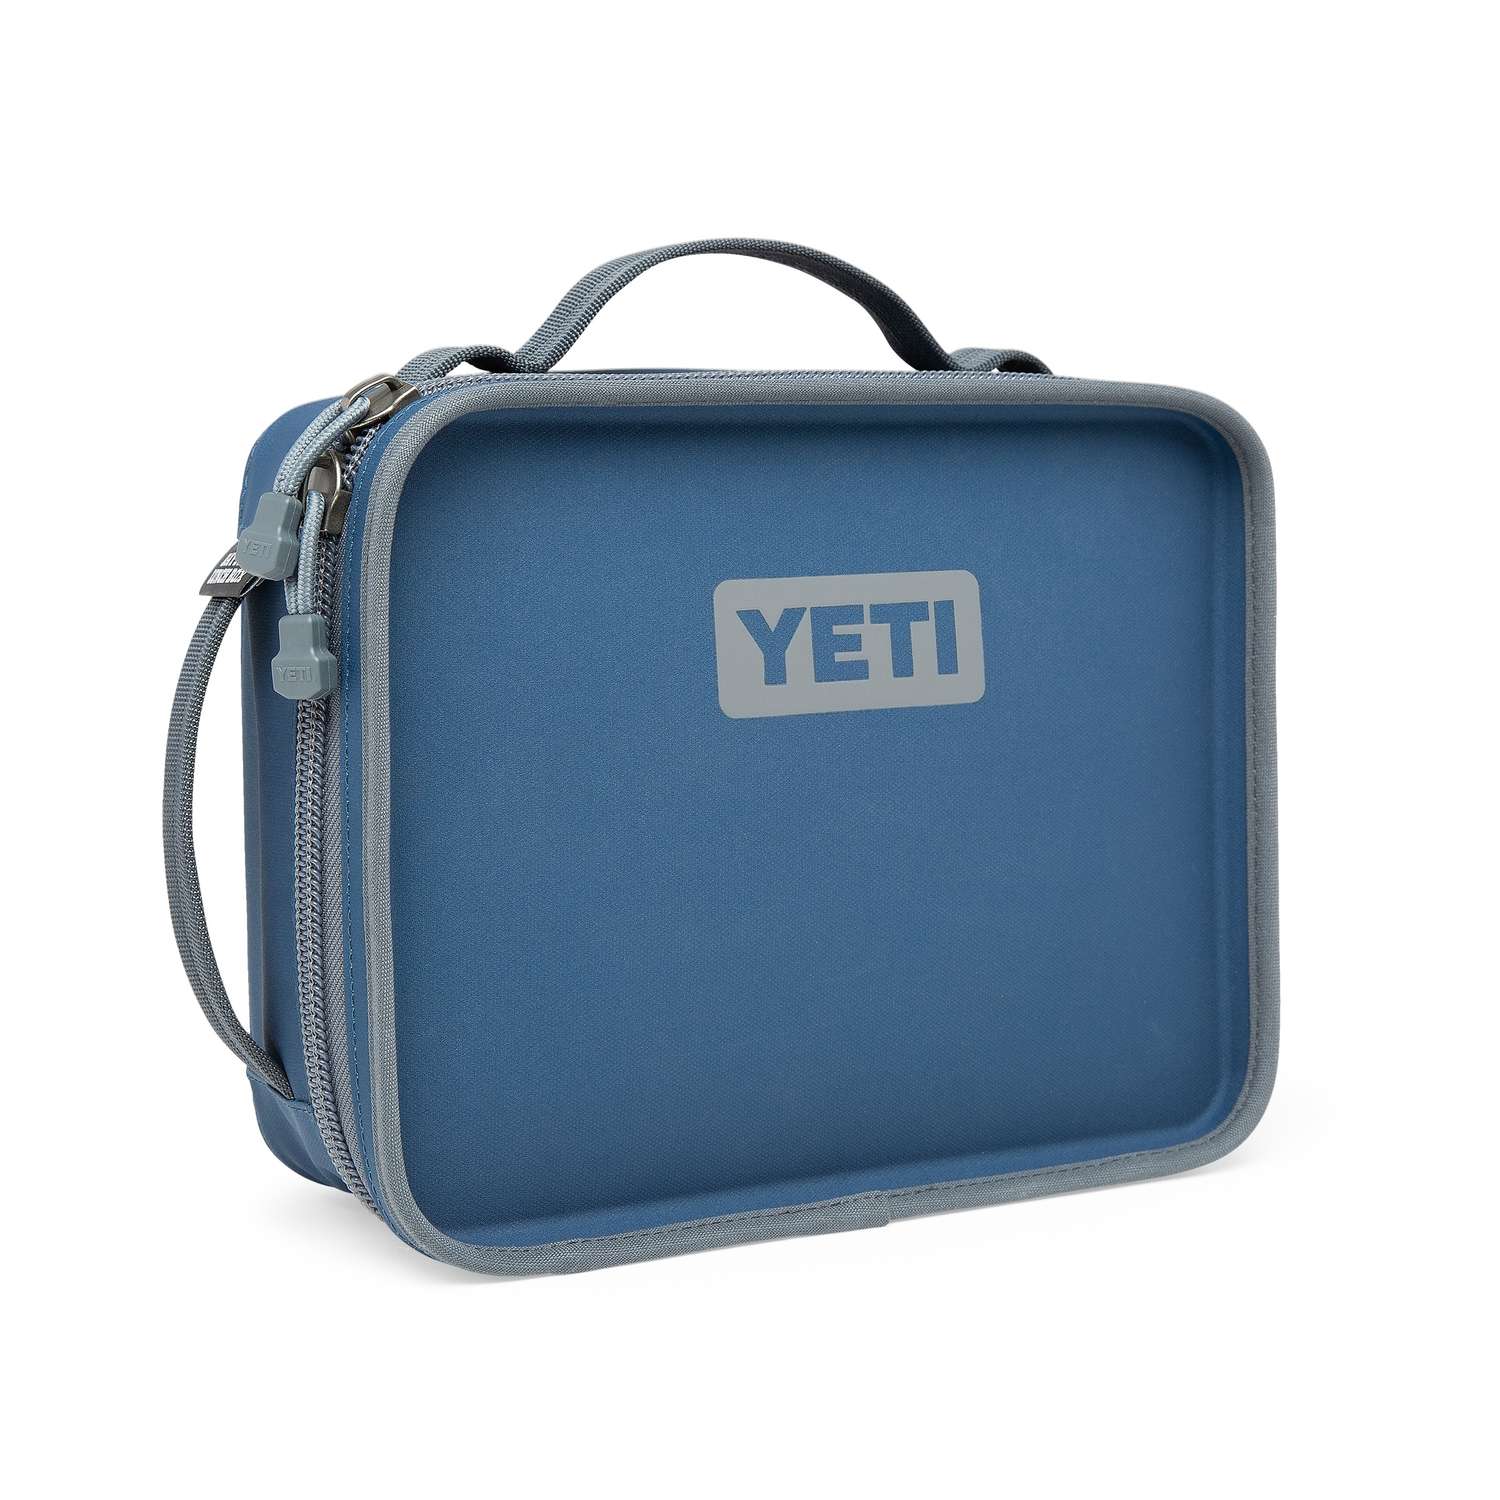 YETI Daytrip Lunch Box Cooler 1 qt Navy Ace Hardware